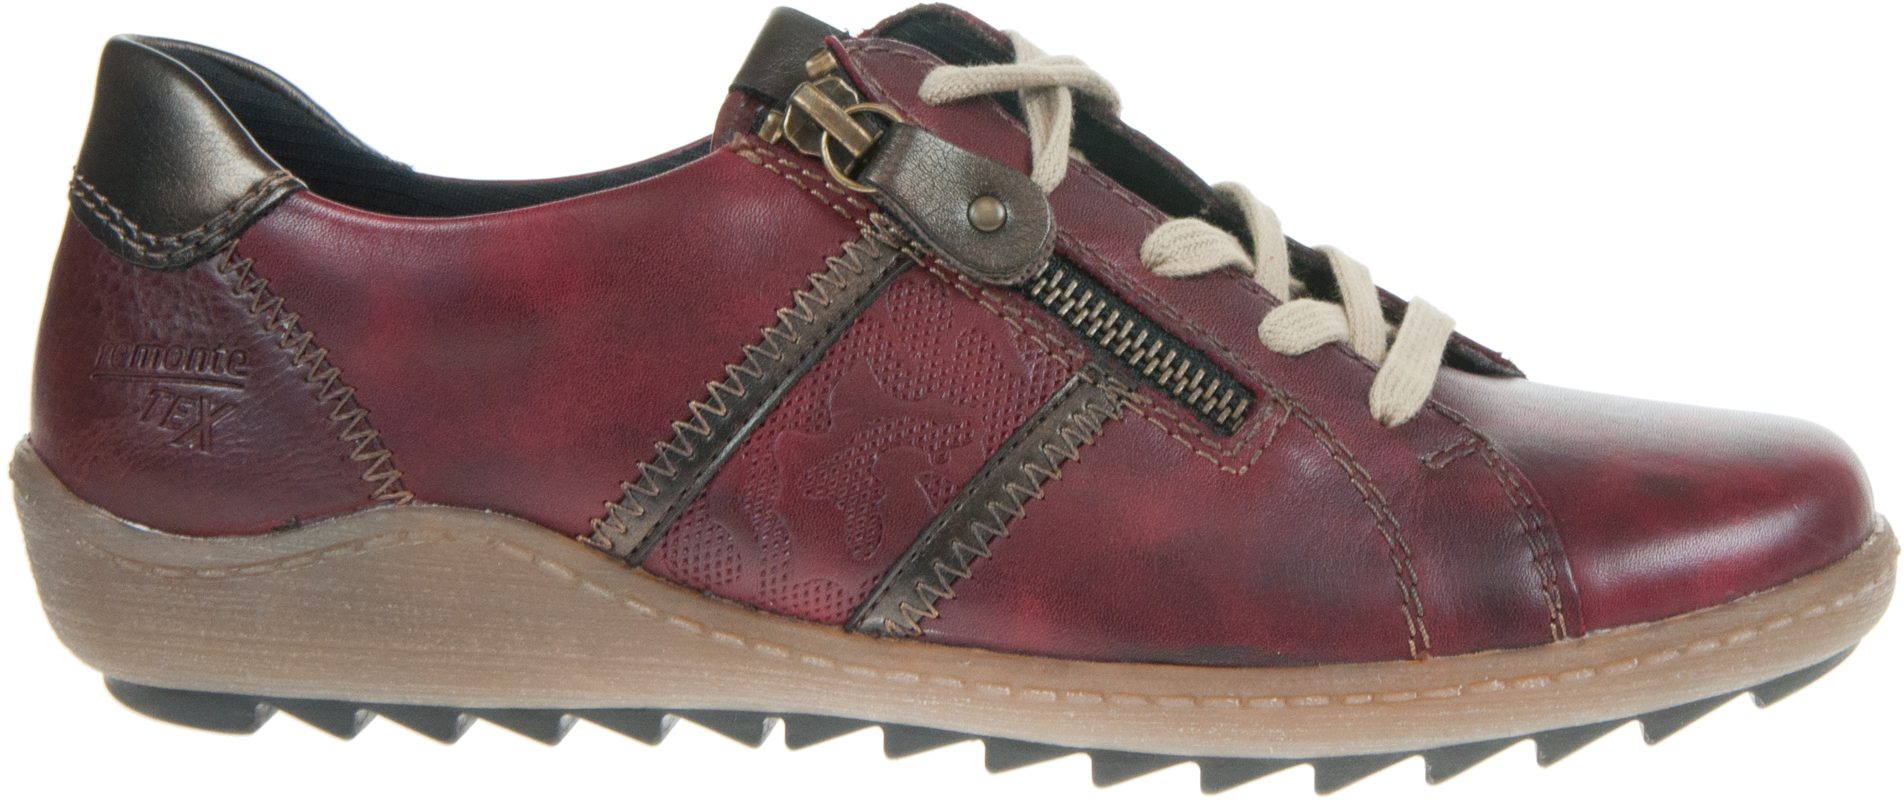 Remonte Liv Red Combi R1426-35 - Everyday Shoes - Humphries Shoes